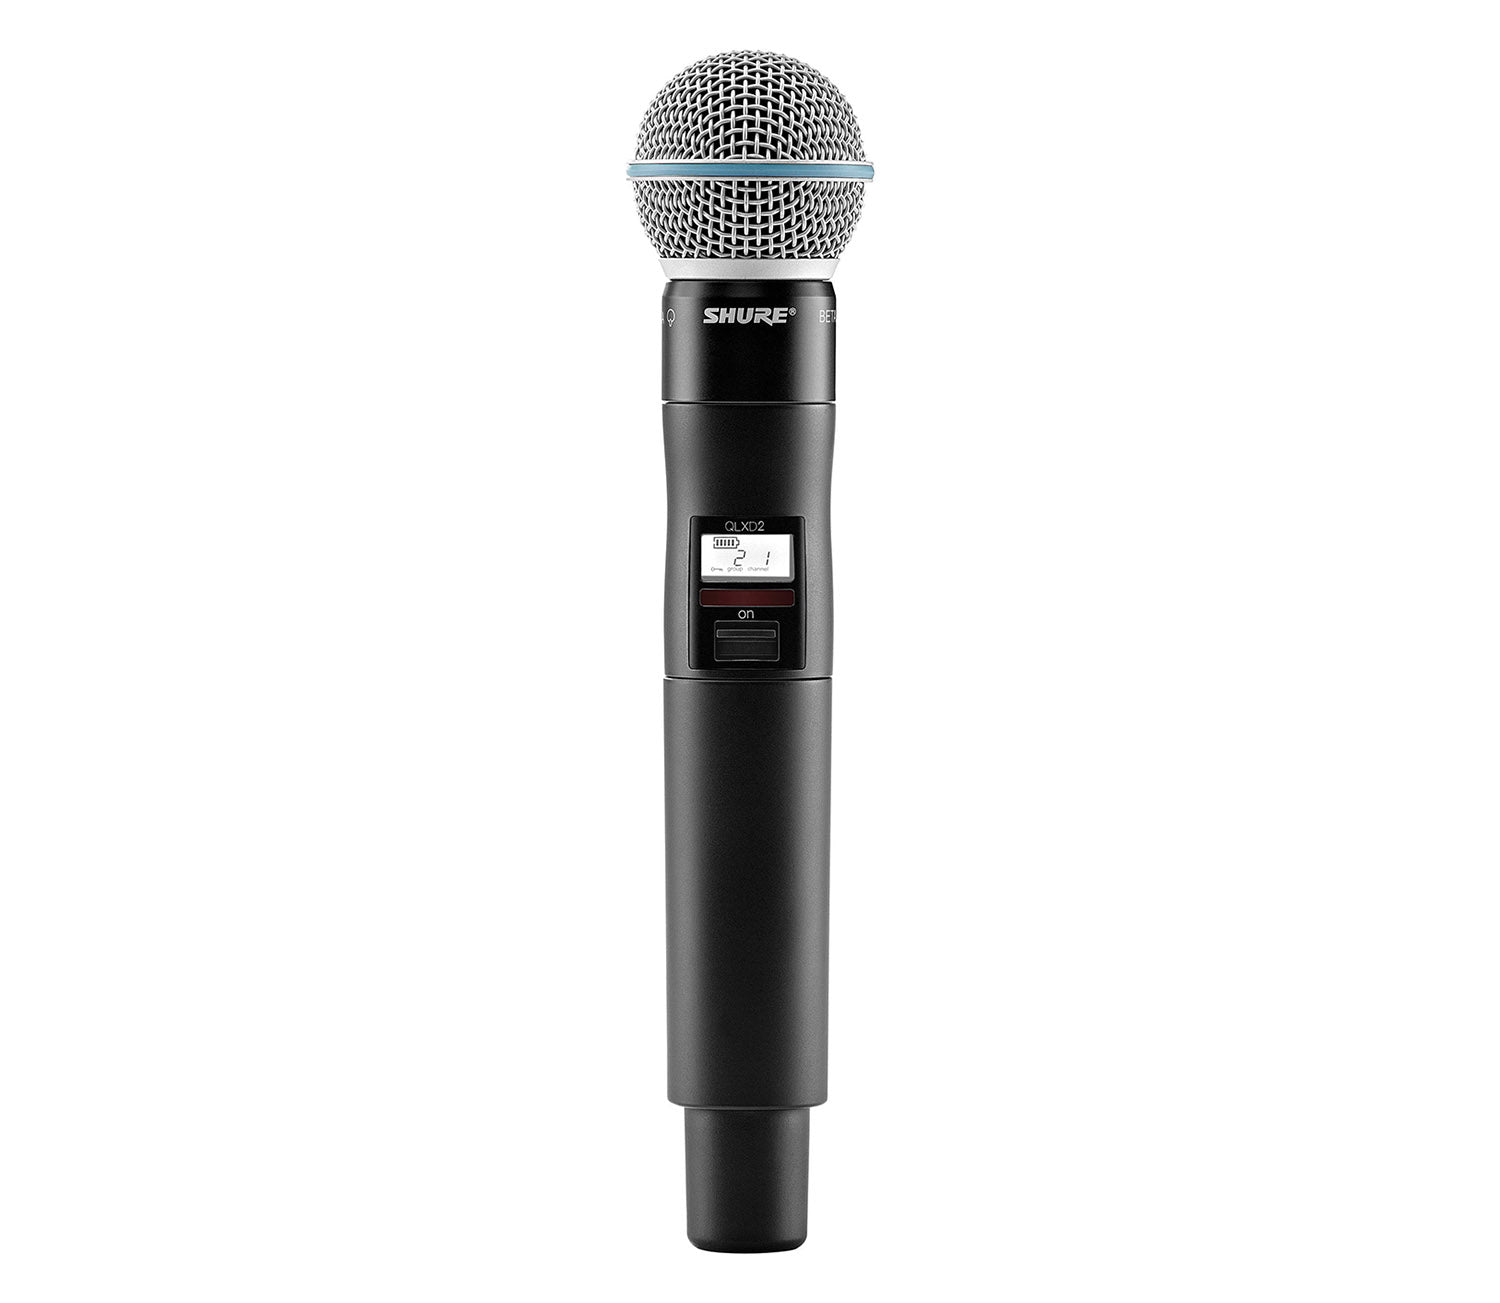 Shure QLXD2/B58 Handheld Wireless Microphone Transmitter with Beta 58A Capsule - Hollywood DJ